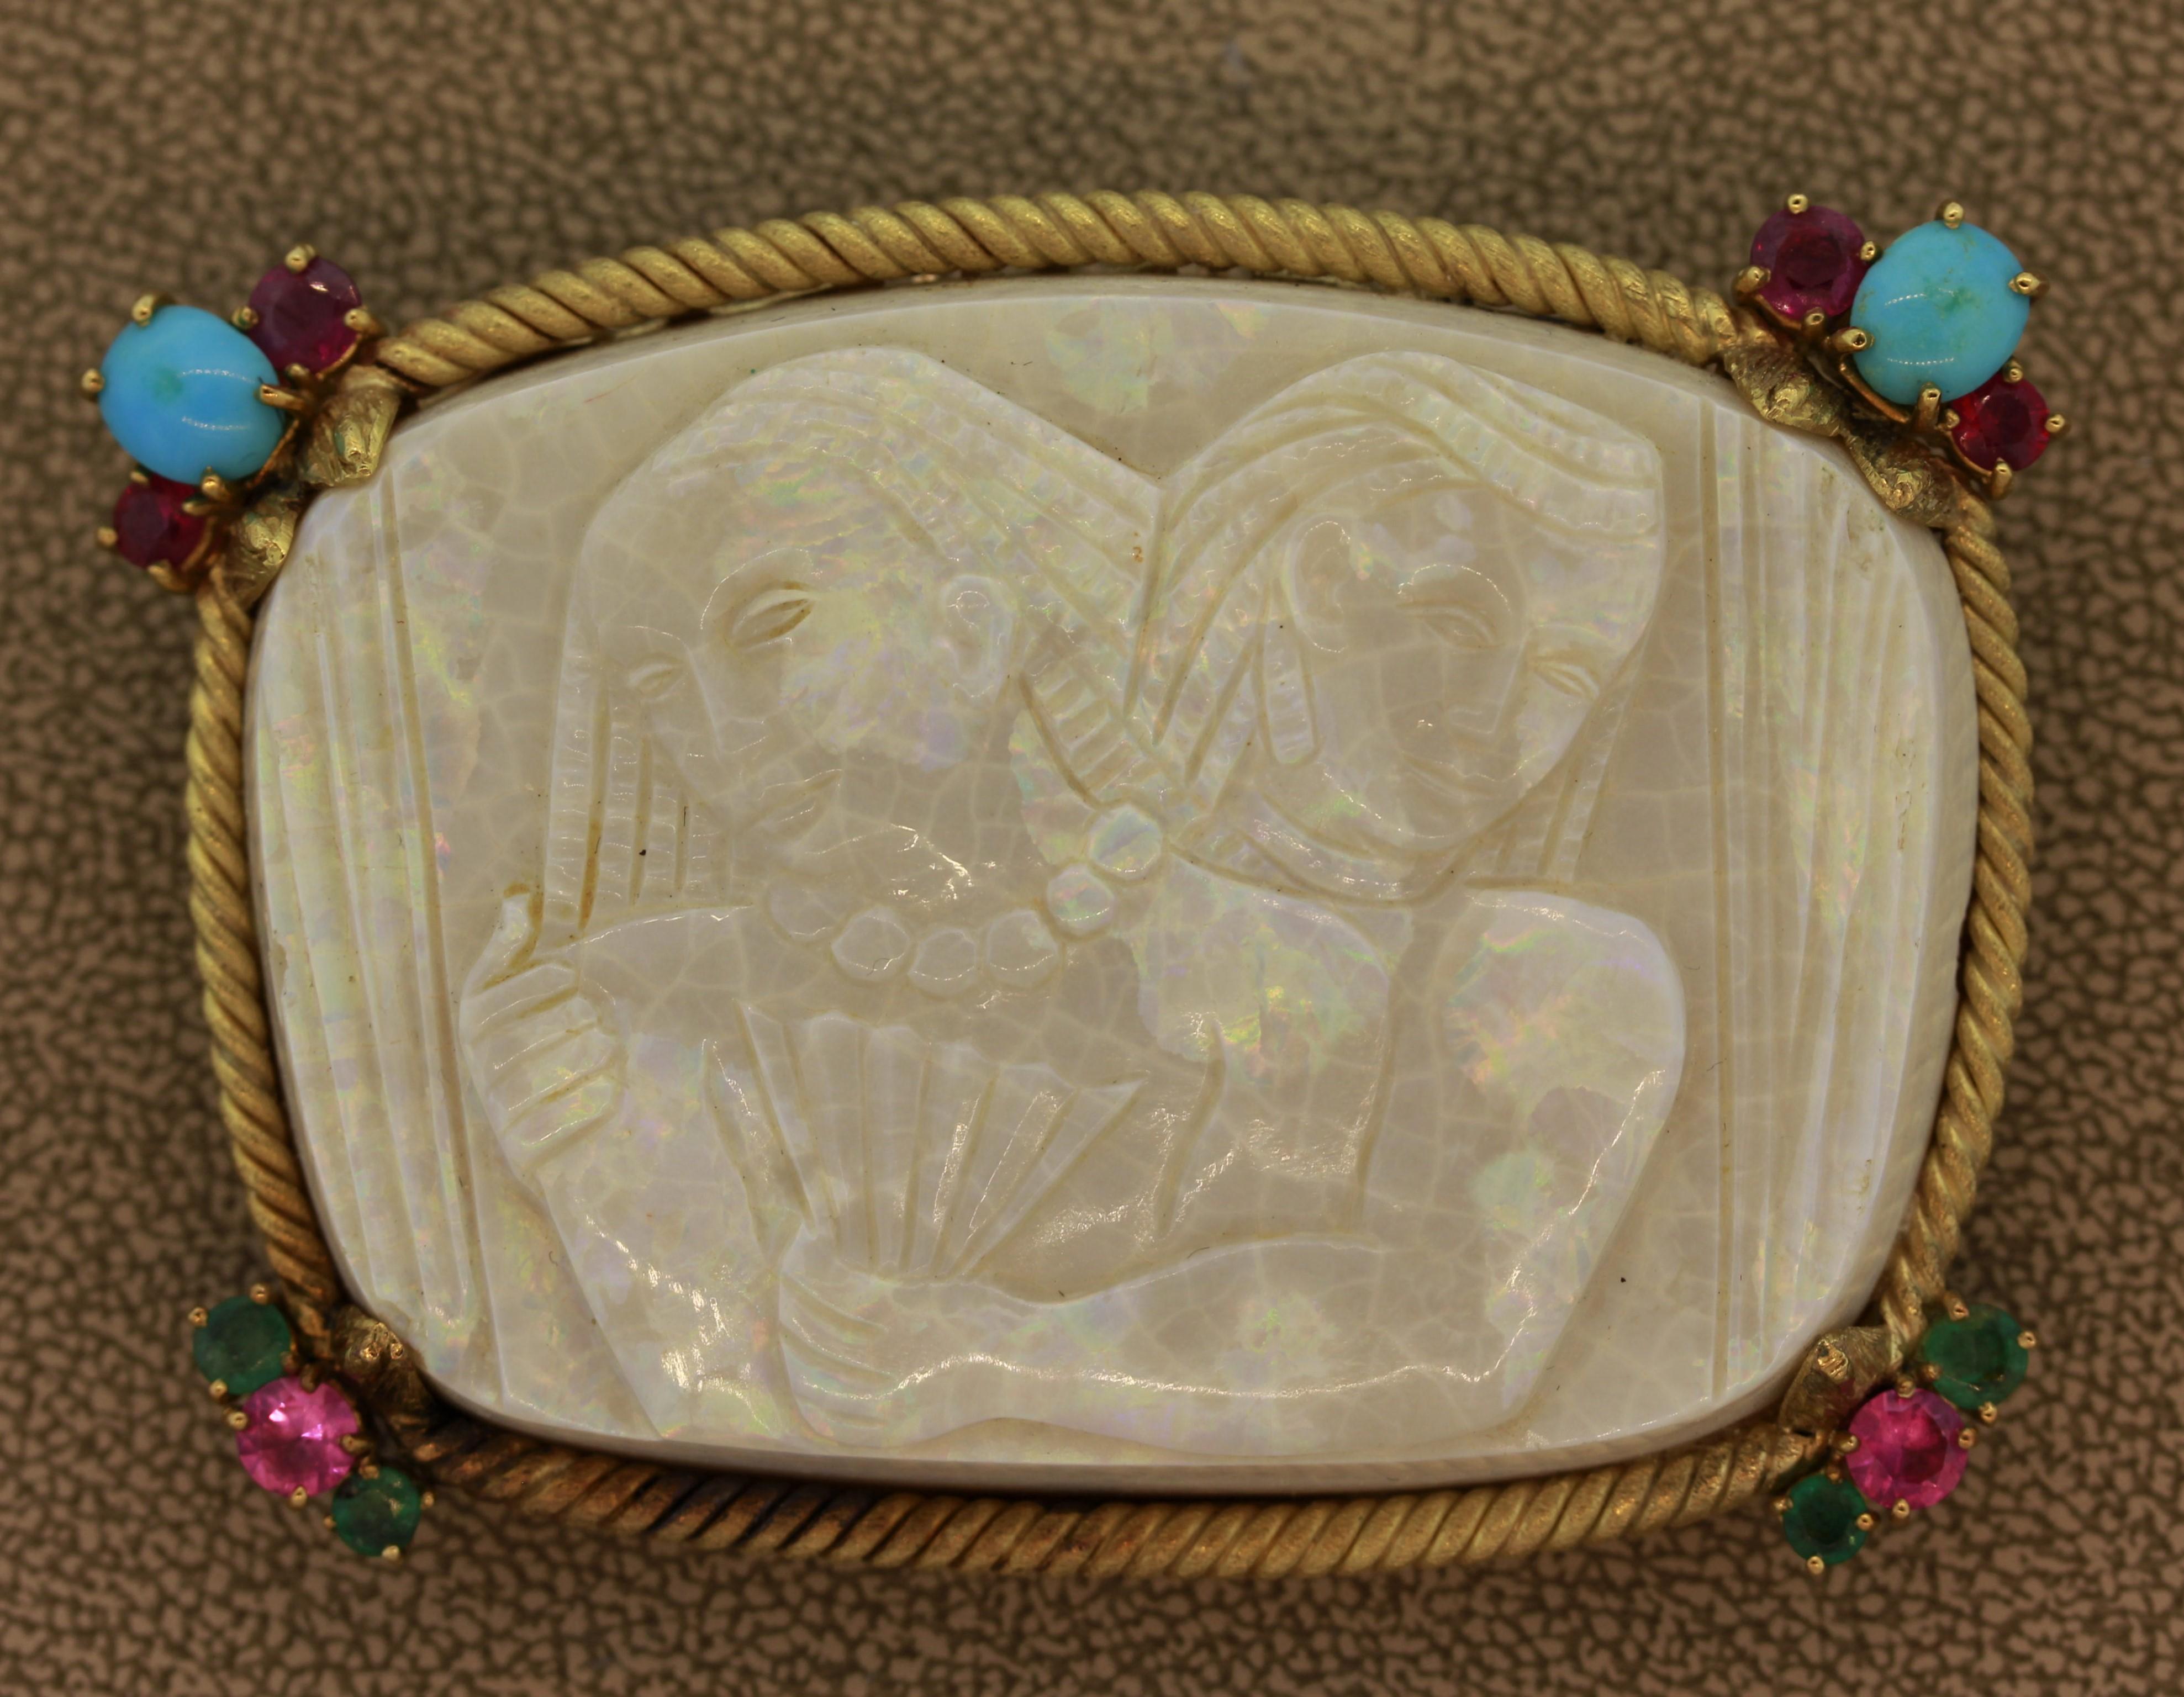 A special piece of art made of a natural piece of Australian white opal. It is hand carved depicting an Ancient Egyptian couple with strong detail and realism. The opal has great play of color as flashes of green, red and everything in between can